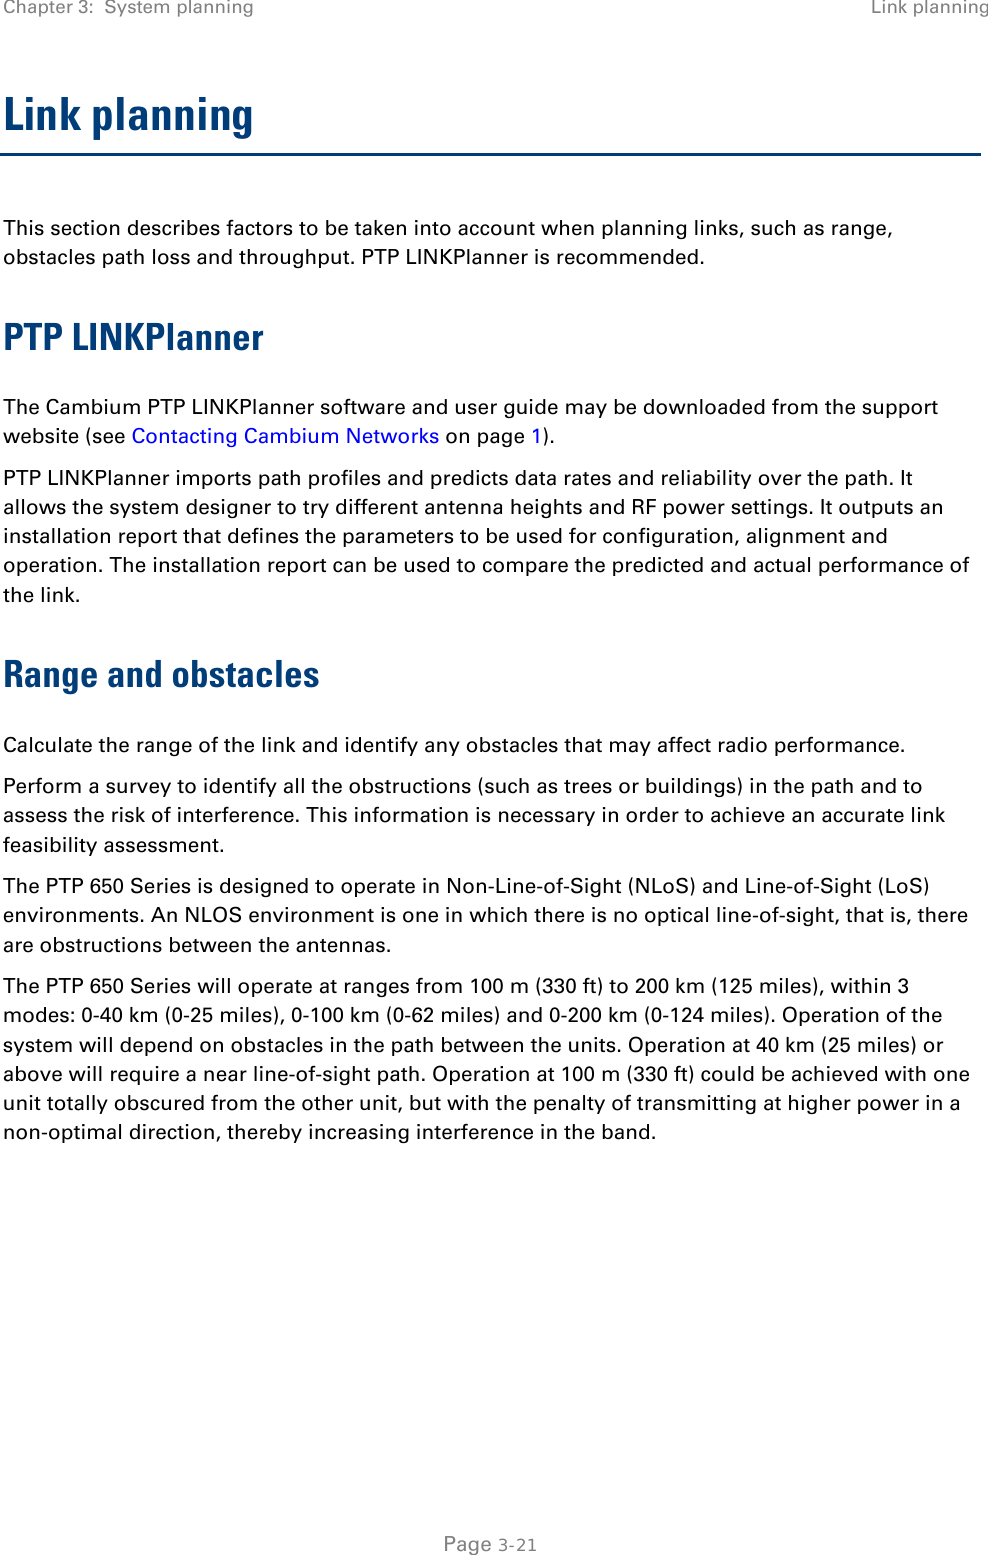 Chapter 3:  System planning Link planning  Link planning This section describes factors to be taken into account when planning links, such as range, obstacles path loss and throughput. PTP LINKPlanner is recommended. PTP LINKPlanner The Cambium PTP LINKPlanner software and user guide may be downloaded from the support website (see Contacting Cambium Networks on page 1). PTP LINKPlanner imports path profiles and predicts data rates and reliability over the path. It allows the system designer to try different antenna heights and RF power settings. It outputs an installation report that defines the parameters to be used for configuration, alignment and operation. The installation report can be used to compare the predicted and actual performance of the link. Range and obstacles Calculate the range of the link and identify any obstacles that may affect radio performance. Perform a survey to identify all the obstructions (such as trees or buildings) in the path and to assess the risk of interference. This information is necessary in order to achieve an accurate link feasibility assessment. The PTP 650 Series is designed to operate in Non-Line-of-Sight (NLoS) and Line-of-Sight (LoS) environments. An NLOS environment is one in which there is no optical line-of-sight, that is, there are obstructions between the antennas. The PTP 650 Series will operate at ranges from 100 m (330 ft) to 200 km (125 miles), within 3 modes: 0-40 km (0-25 miles), 0-100 km (0-62 miles) and 0-200 km (0-124 miles). Operation of the system will depend on obstacles in the path between the units. Operation at 40 km (25 miles) or above will require a near line-of-sight path. Operation at 100 m (330 ft) could be achieved with one unit totally obscured from the other unit, but with the penalty of transmitting at higher power in a non-optimal direction, thereby increasing interference in the band.  Page 3-21 